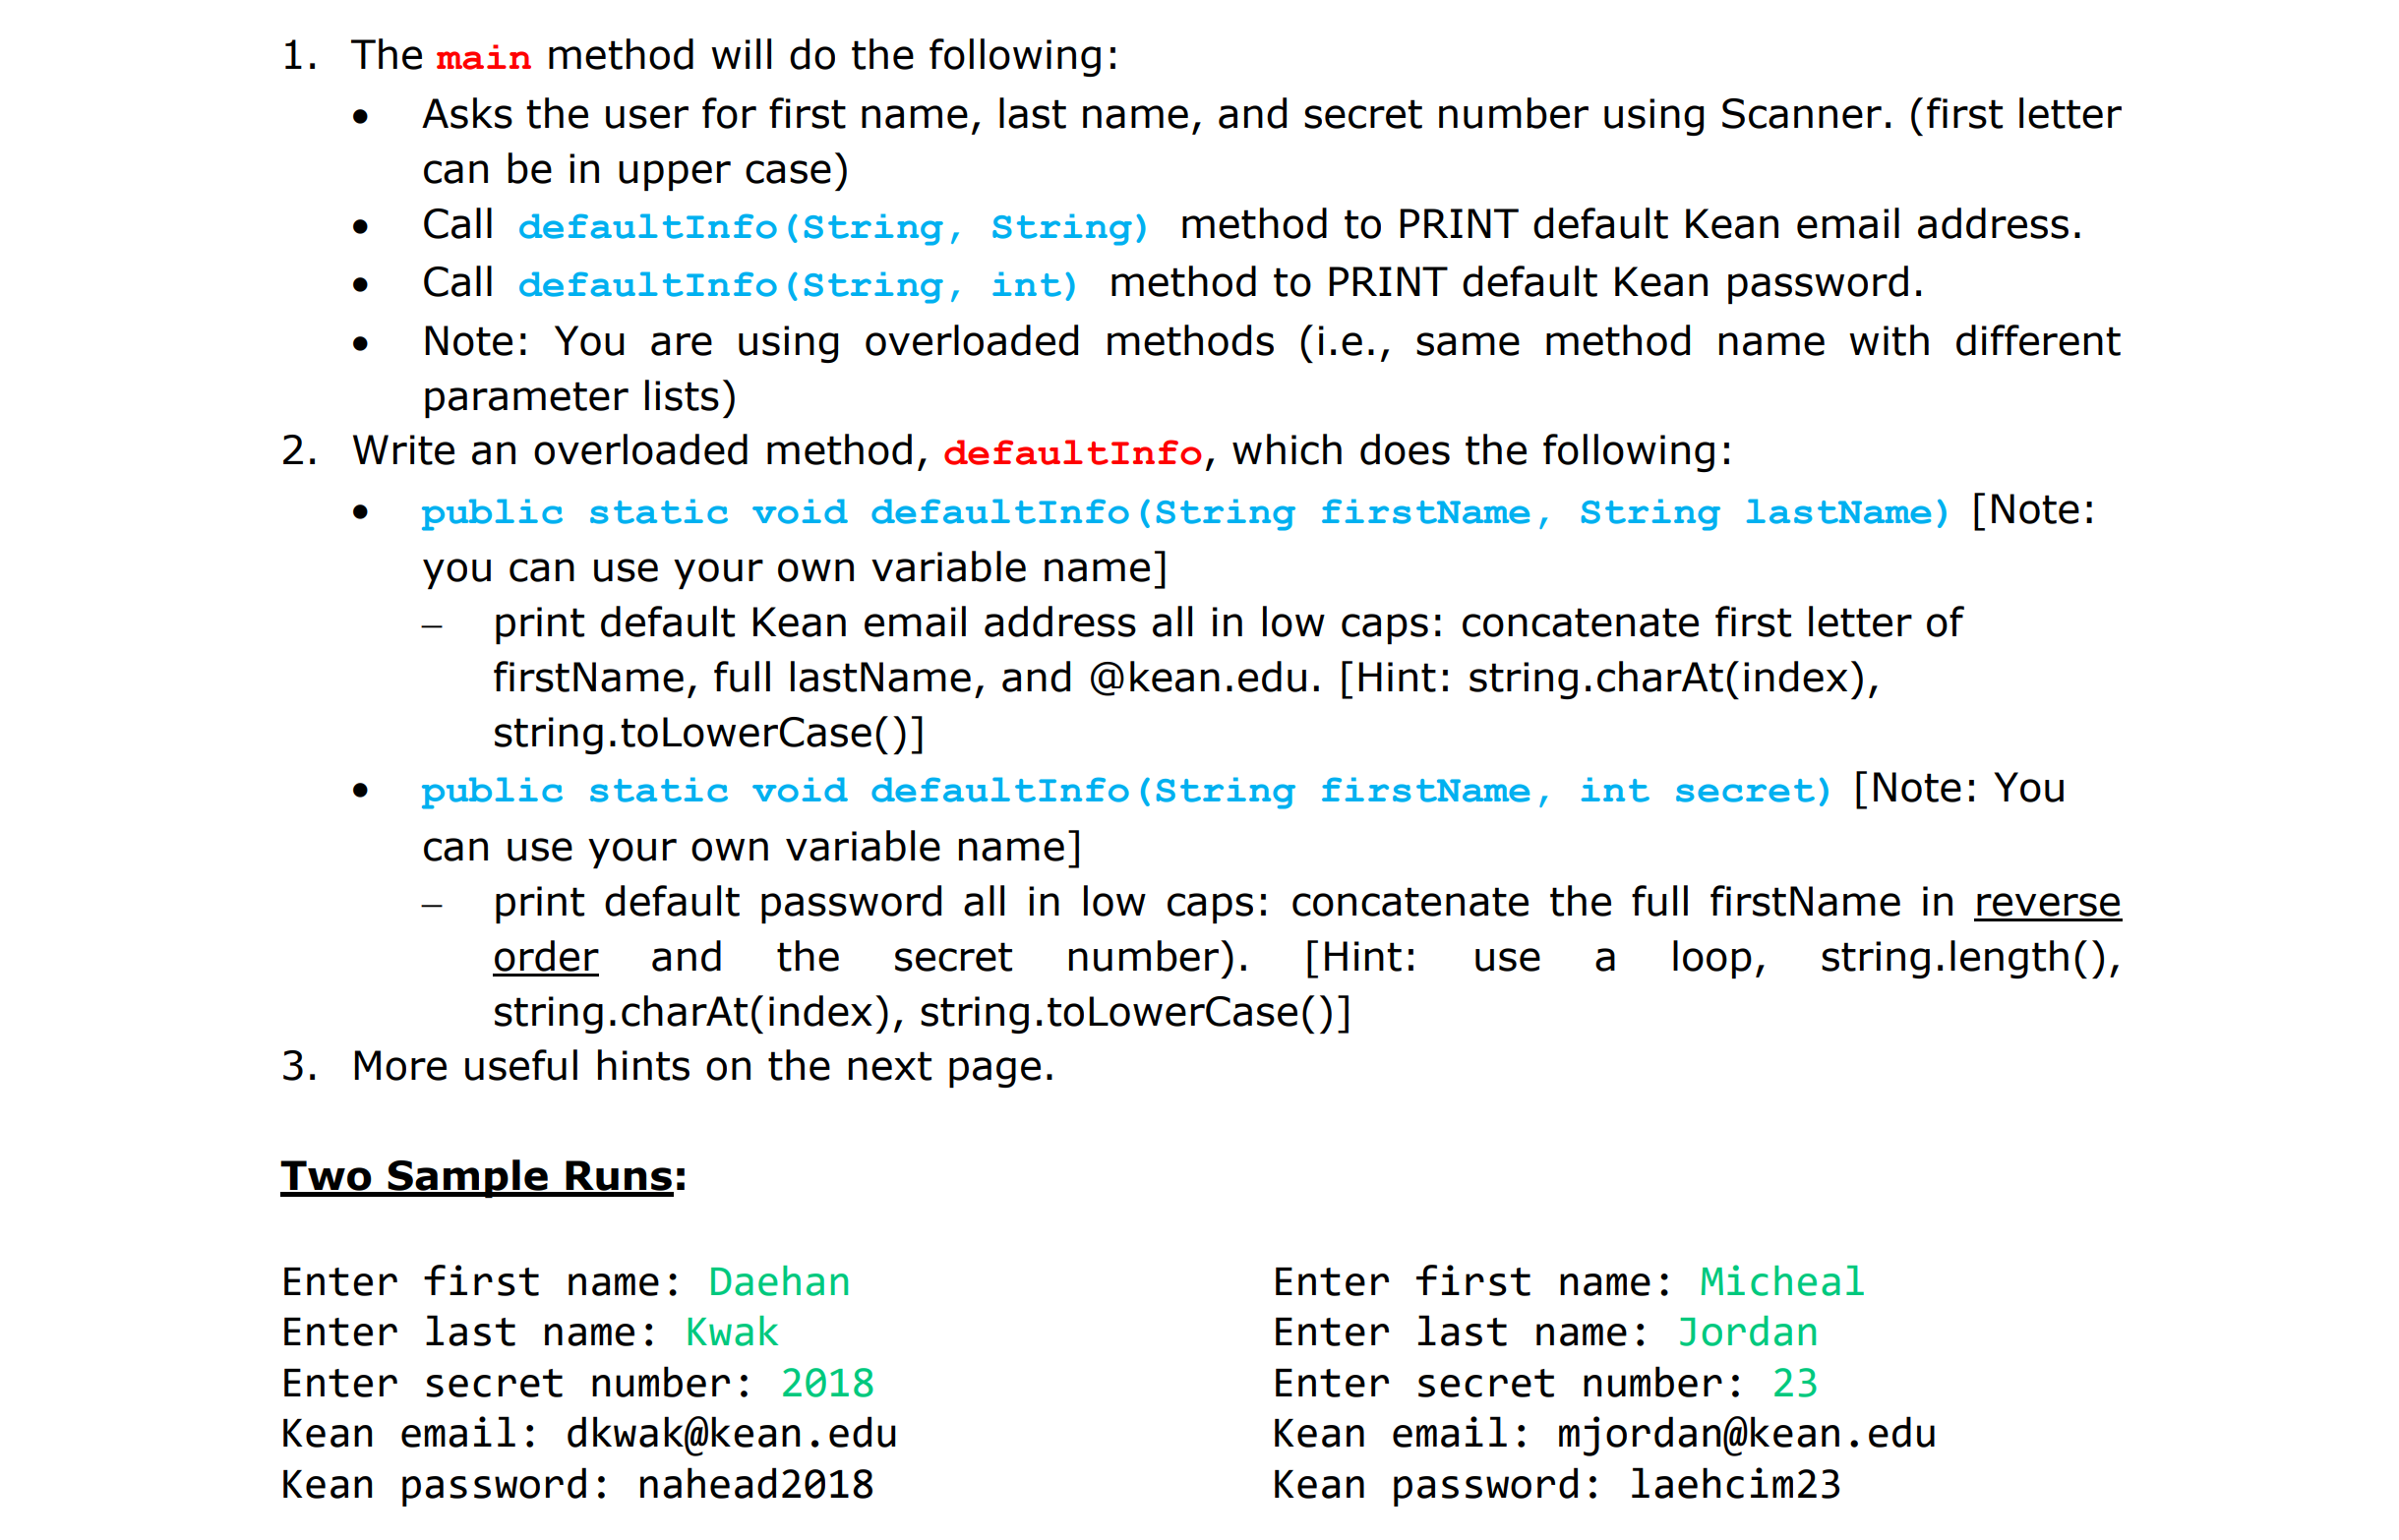 1. The main method will do the following:
· Asks the user for first name, last name, and secret number using Scanner. (first letter
Call defaultInfo (String, String) method to PRINT default Kean email address
Note: You are using overloaded methods (i.e., same method name with different
can be in upper case)
Call defaultInfo (String, int) method to PRINT default Kean password
parameter lists)
2. Write an overloaded method, defaultInfo, which does the following:
public static void defaultInfo (String firstName, String lastName) [Note:
you can use your own variable name]
print default Kean email address all in low caps: concatenate first letter of
firstName, full lastName, and @kean.edu. [Hint: string.charAt(index),
string.toLowerCase)1
public static void defaultInfo (String firstName, int secret) [Note: You
can use your own variable name]
print default password all in low caps: concatenate the full firstName in reverse
order and the secret number). [Hint: use a loop, string.lengthO,
string.charAt(index), string.toLowerCase()]
3. More useful hints on the next page.
Two Sample Runs:
Enter first name: Daehan
Enter last name: Kwak
Enter secret number: 2018
Kean email: dkwak@kean.edu
Kean password: nahead2018
Enter first name:Micheal
Enter last name: Jordan
Enter secret number: 23
Kean email: miordan@kean.edu
Kean password: laehcim23
